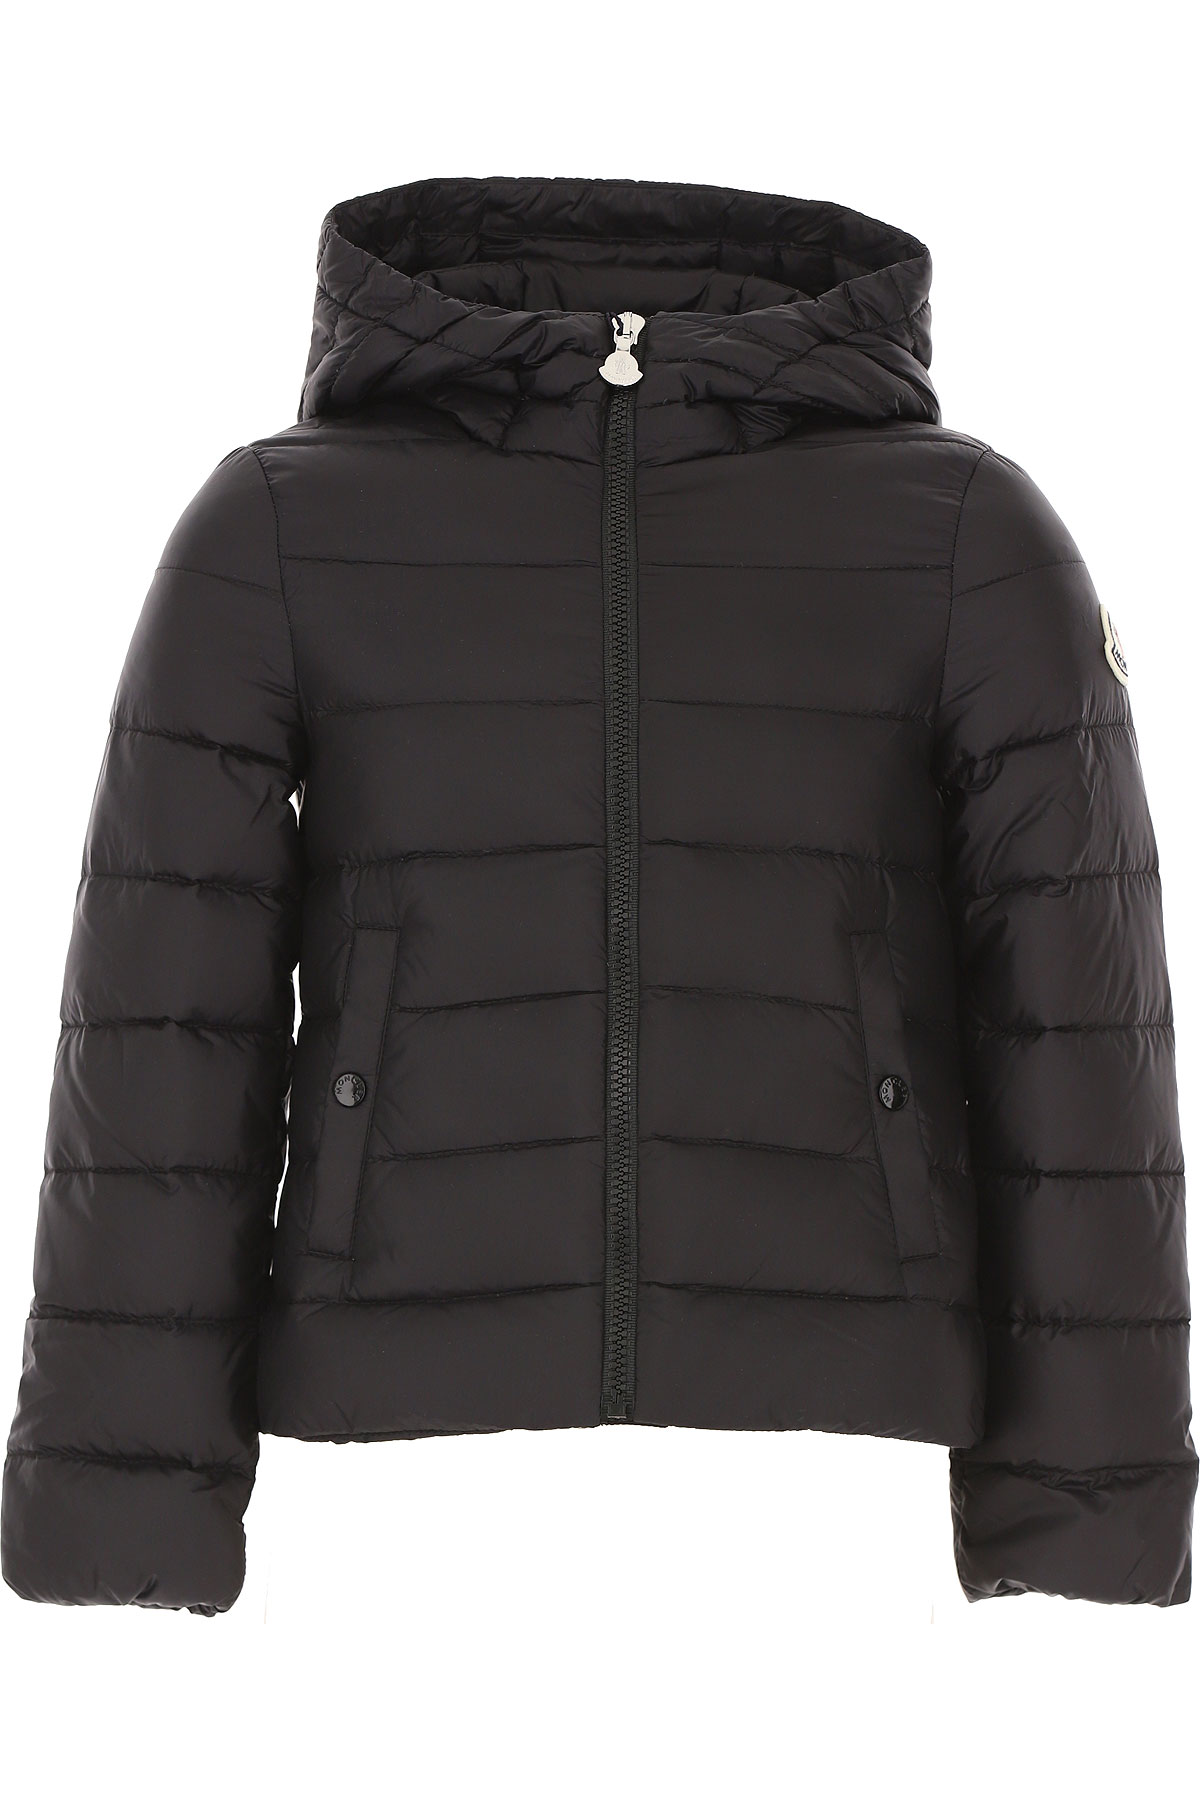 Girls Clothing Moncler, Style code: 1a10910-c0428-999